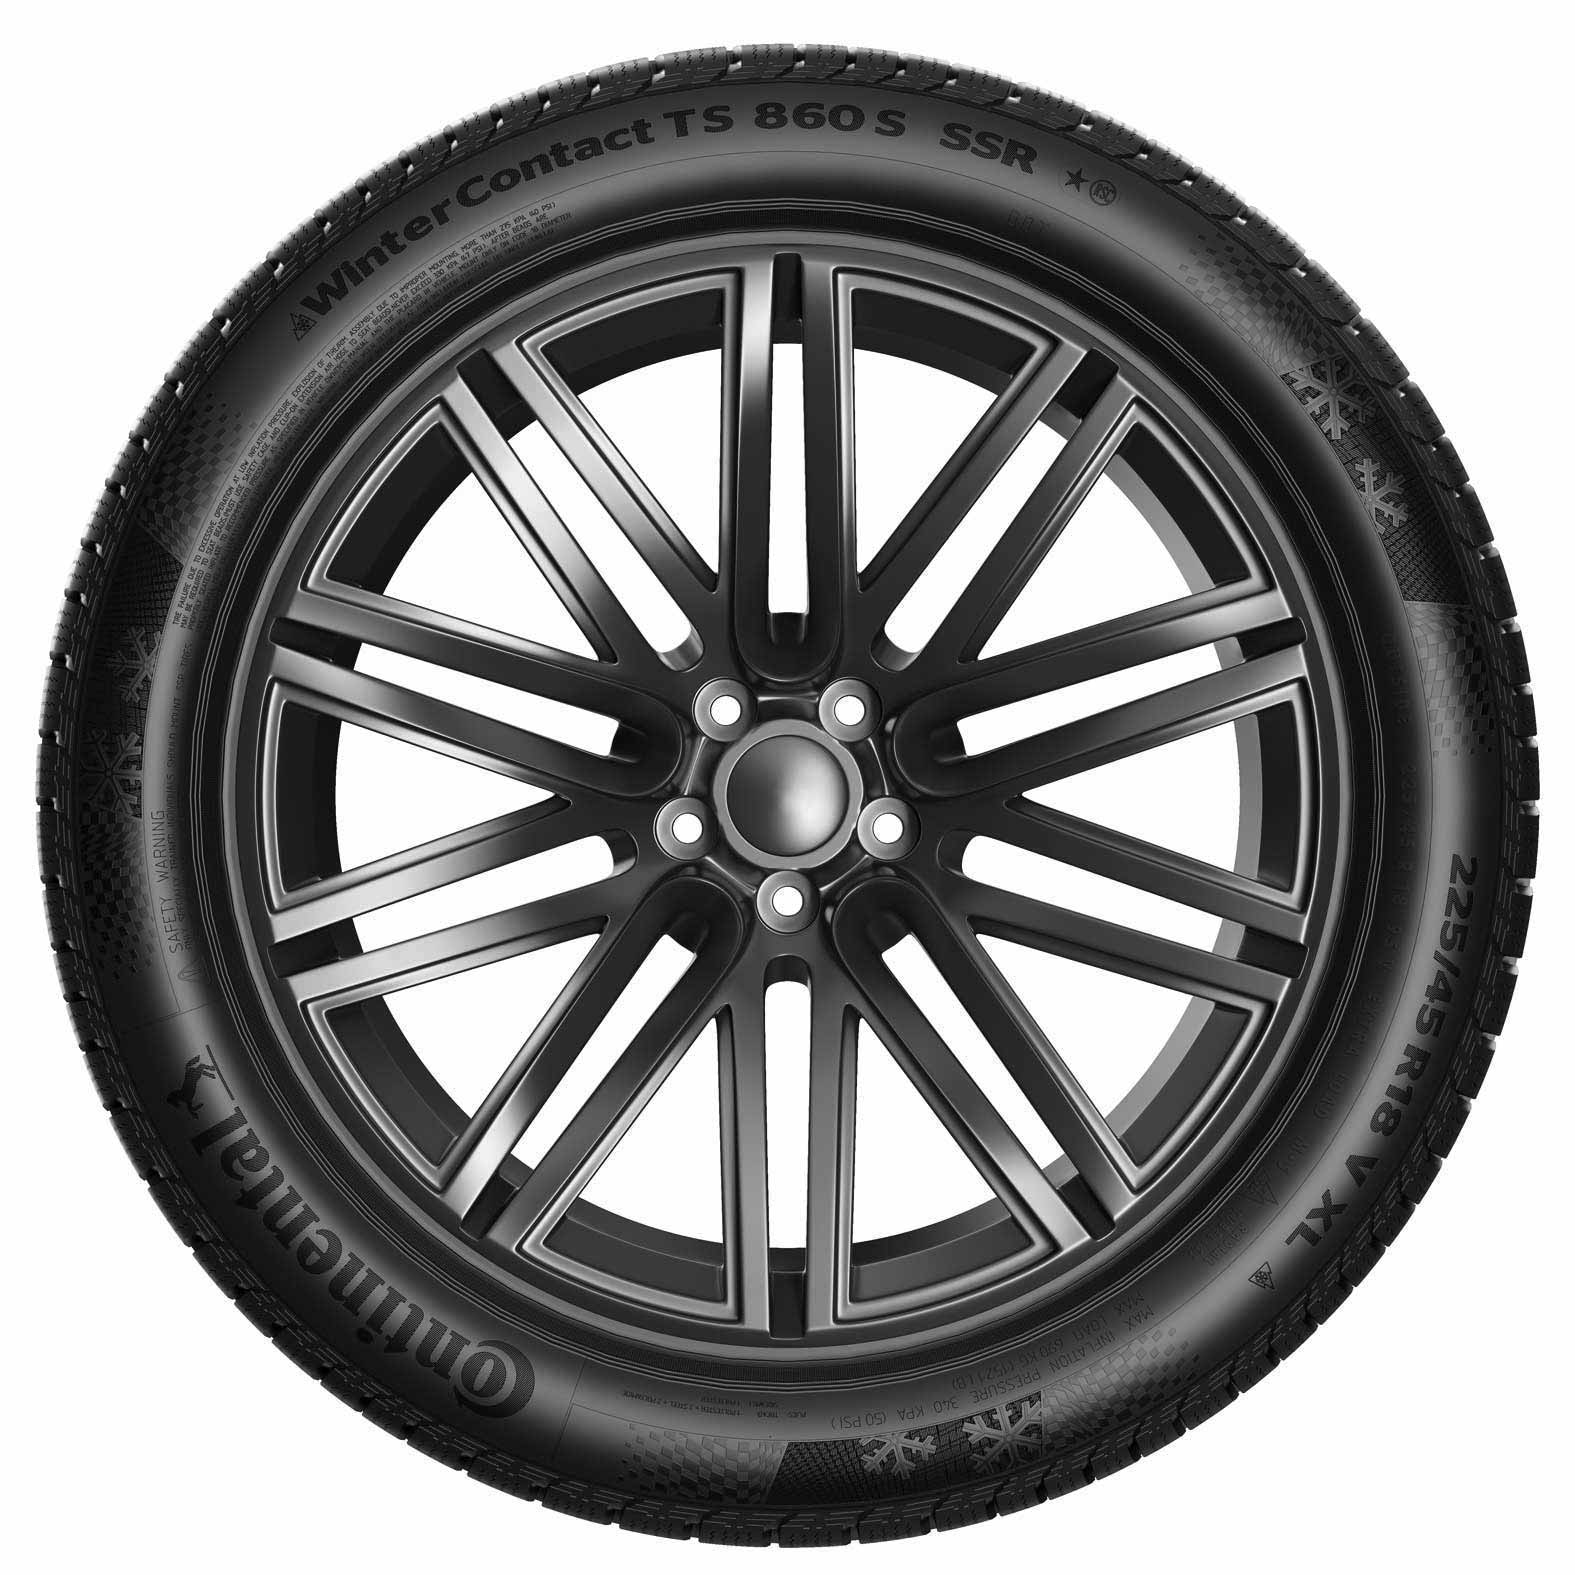 Kal Tire Continental Tires TS860 | Winter WinterContact S for